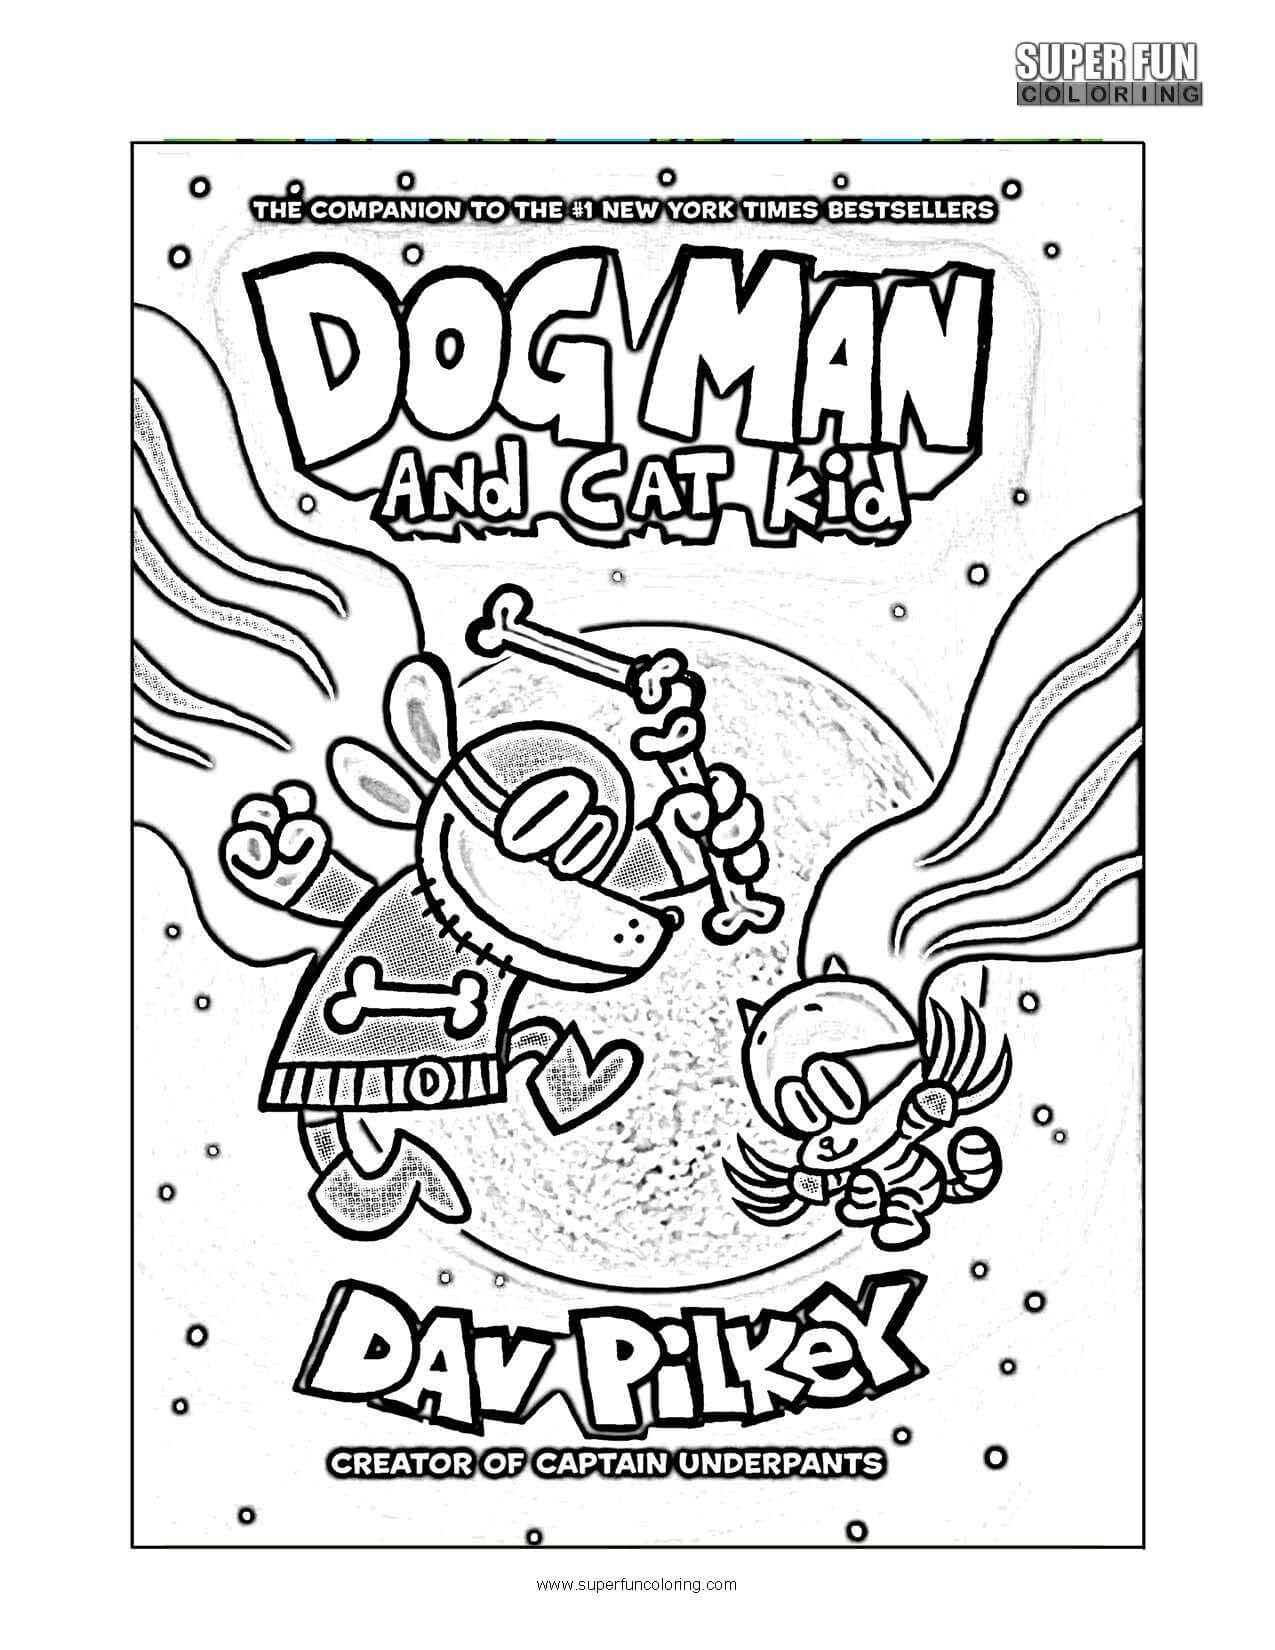 Dog man and cat kid coloring page